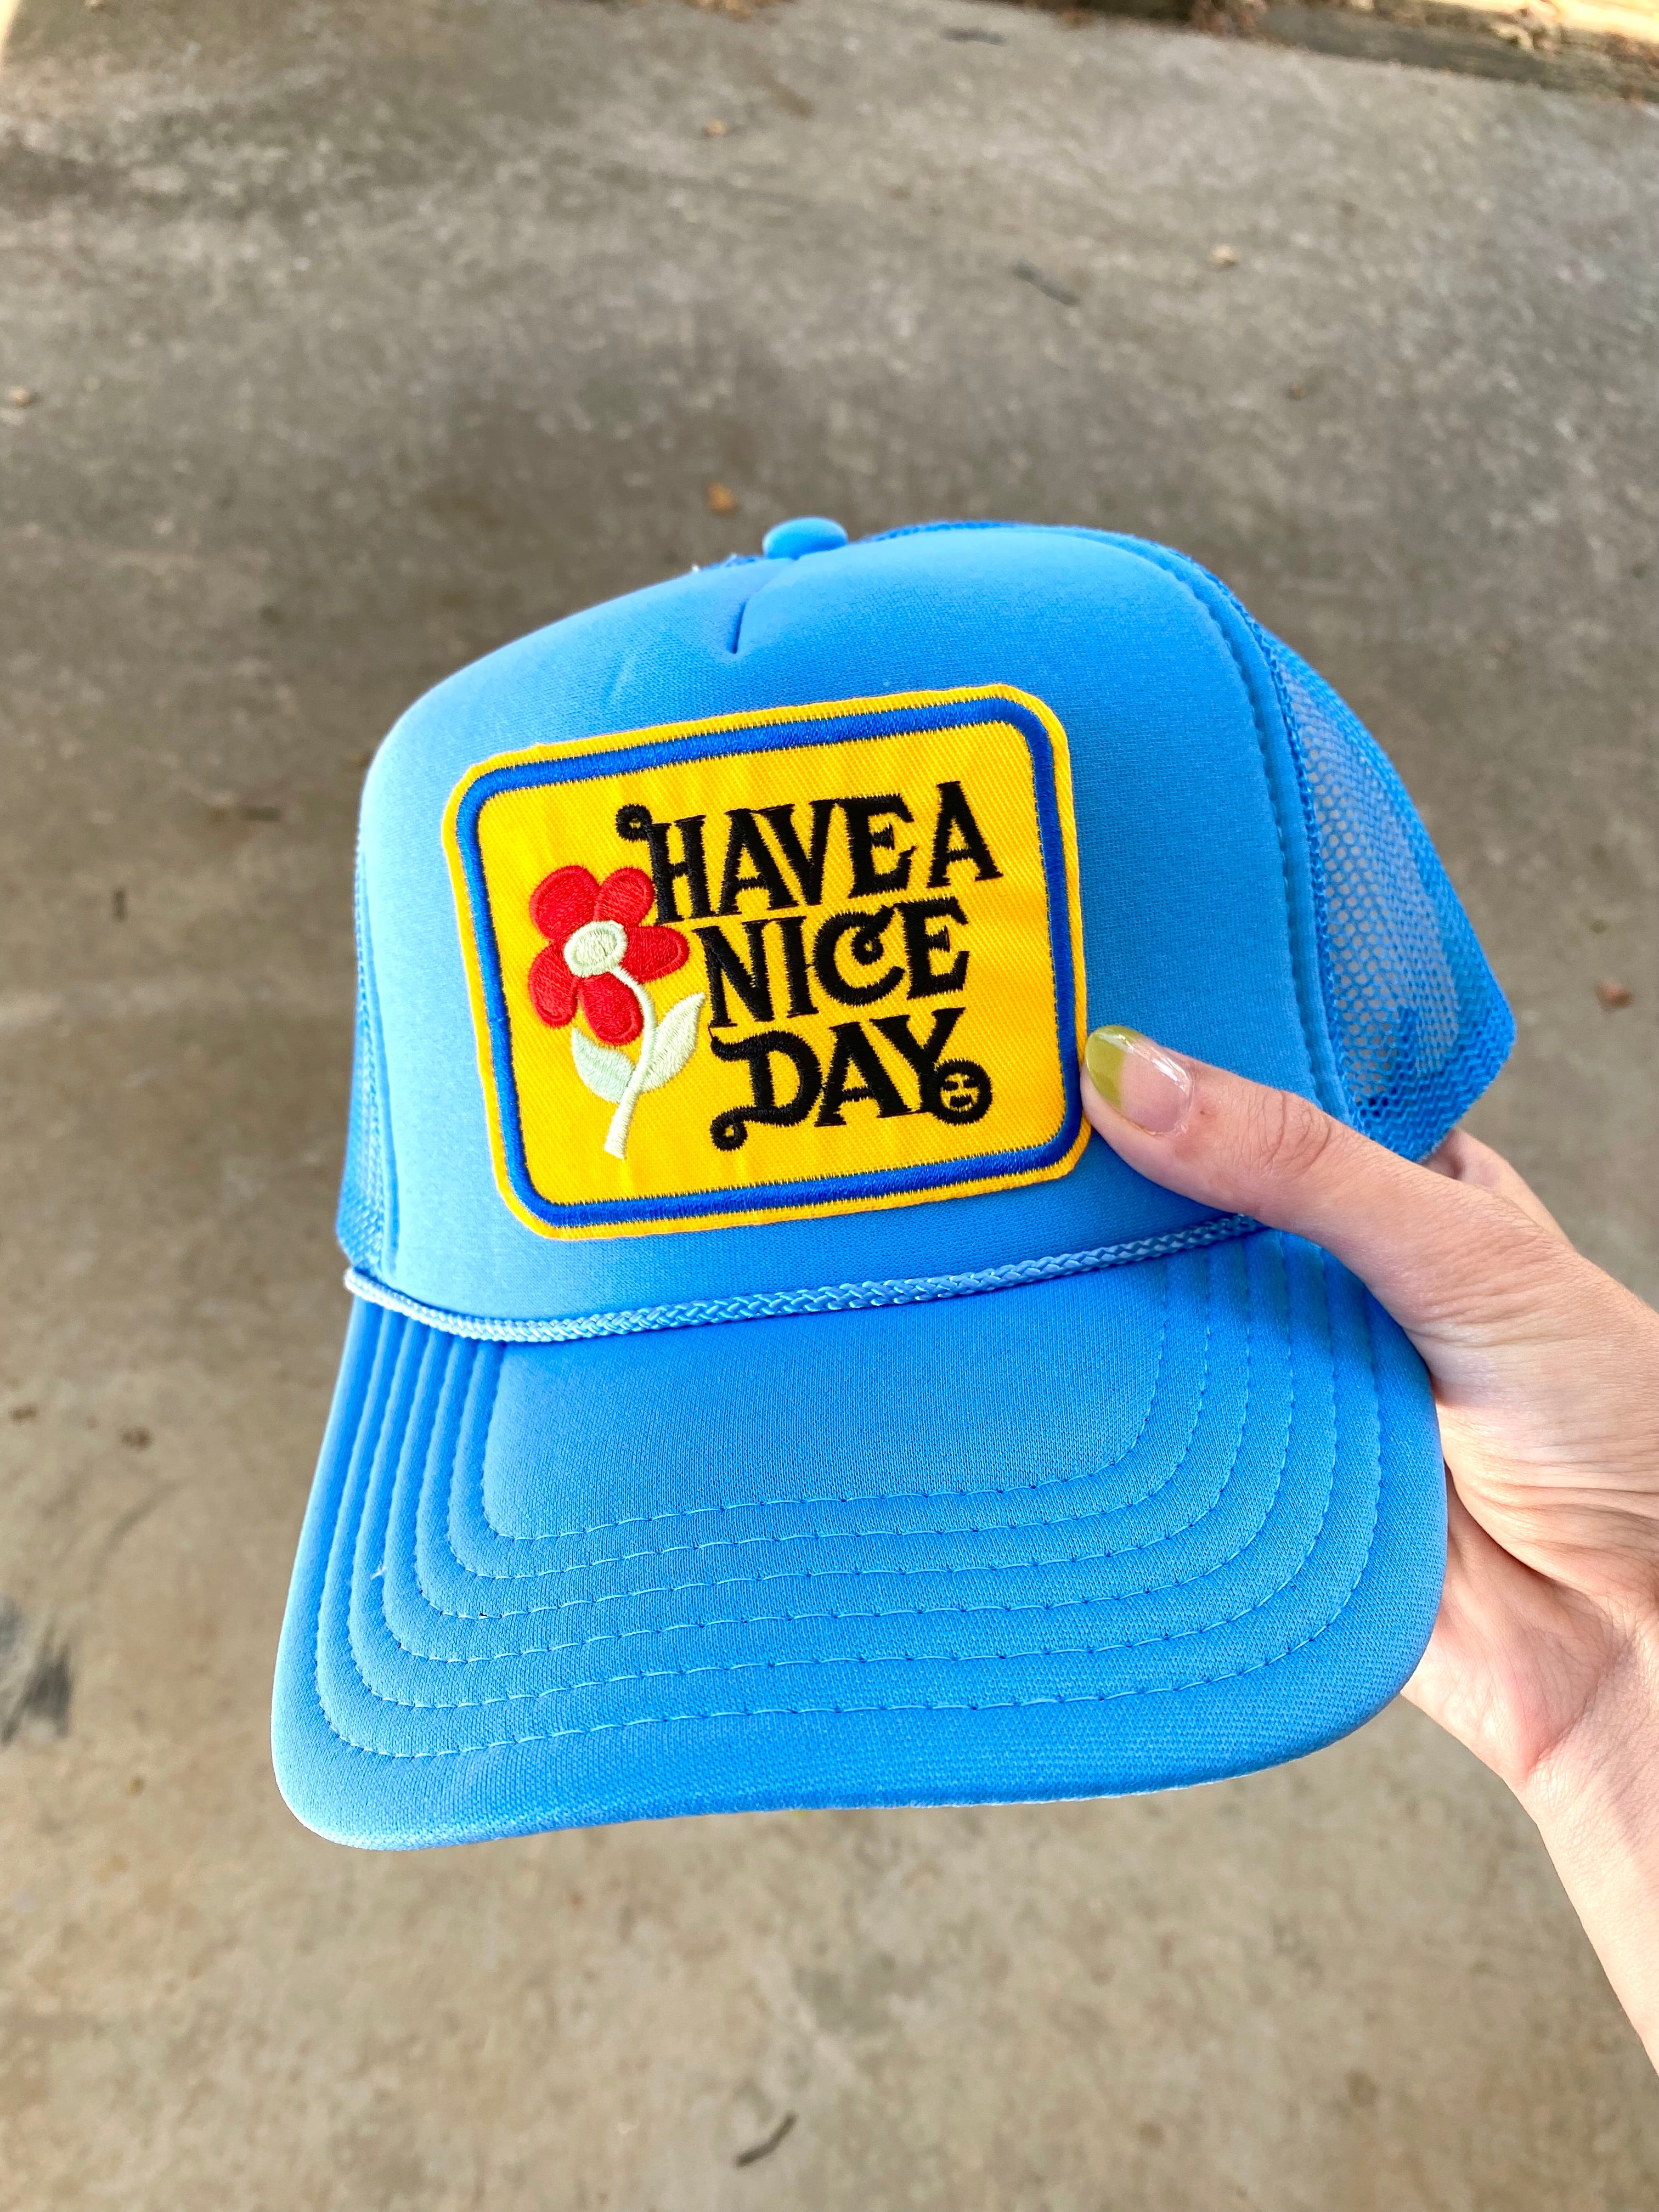 Have A Nice Day Trucker Hat